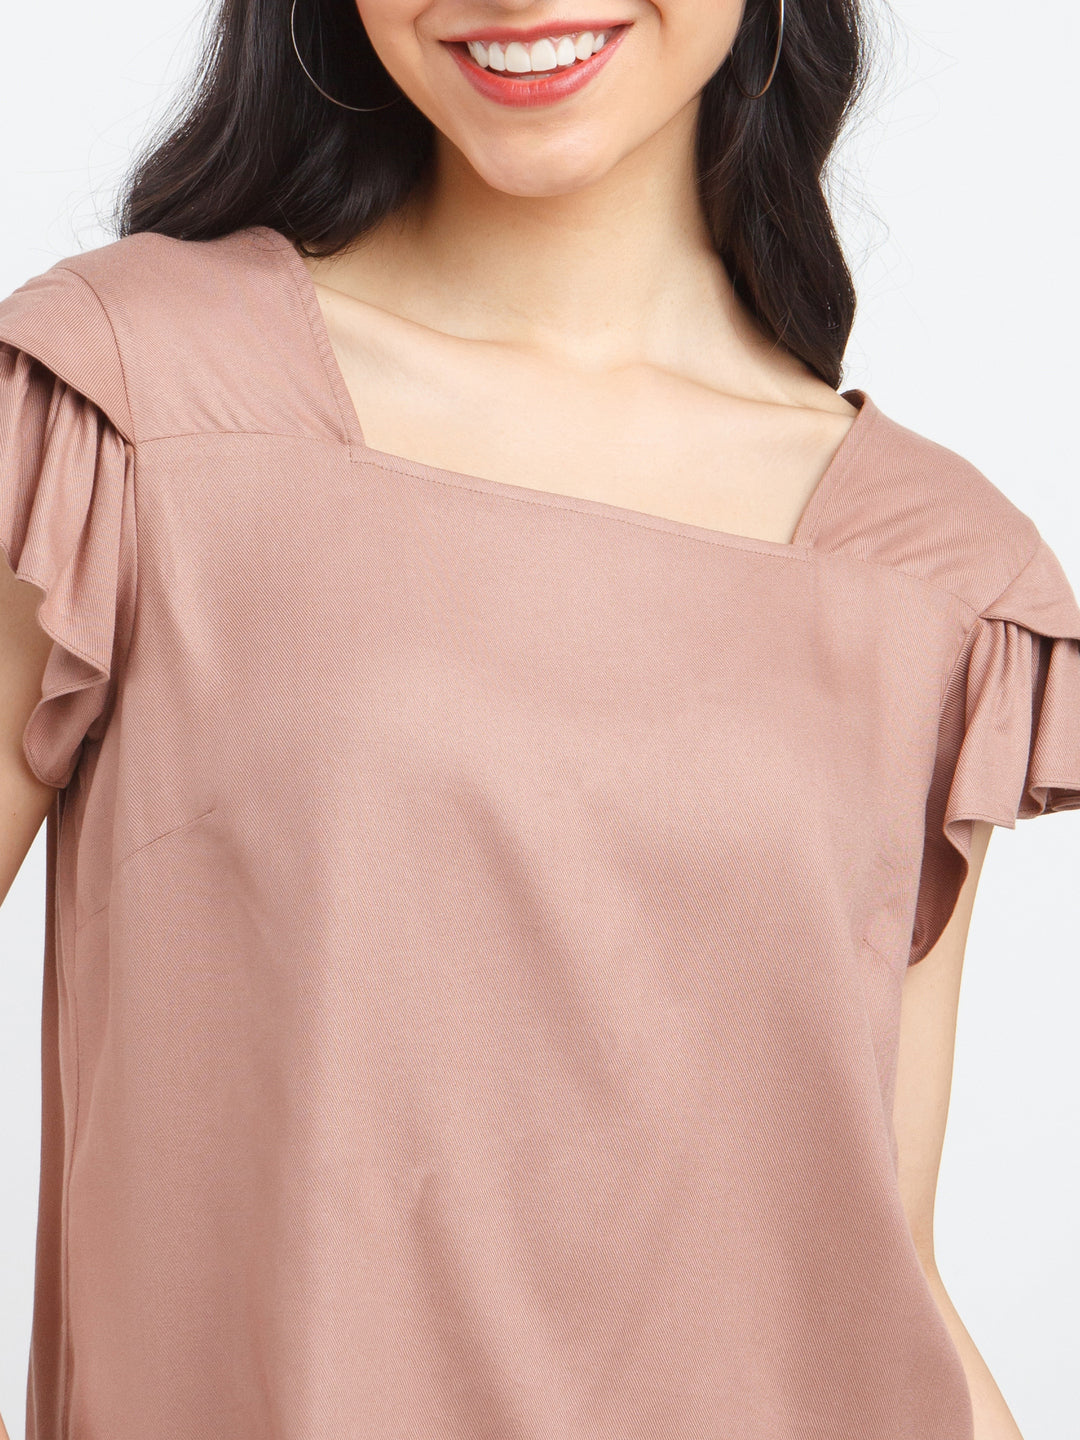 Brown Solid Ruffled Top For Women